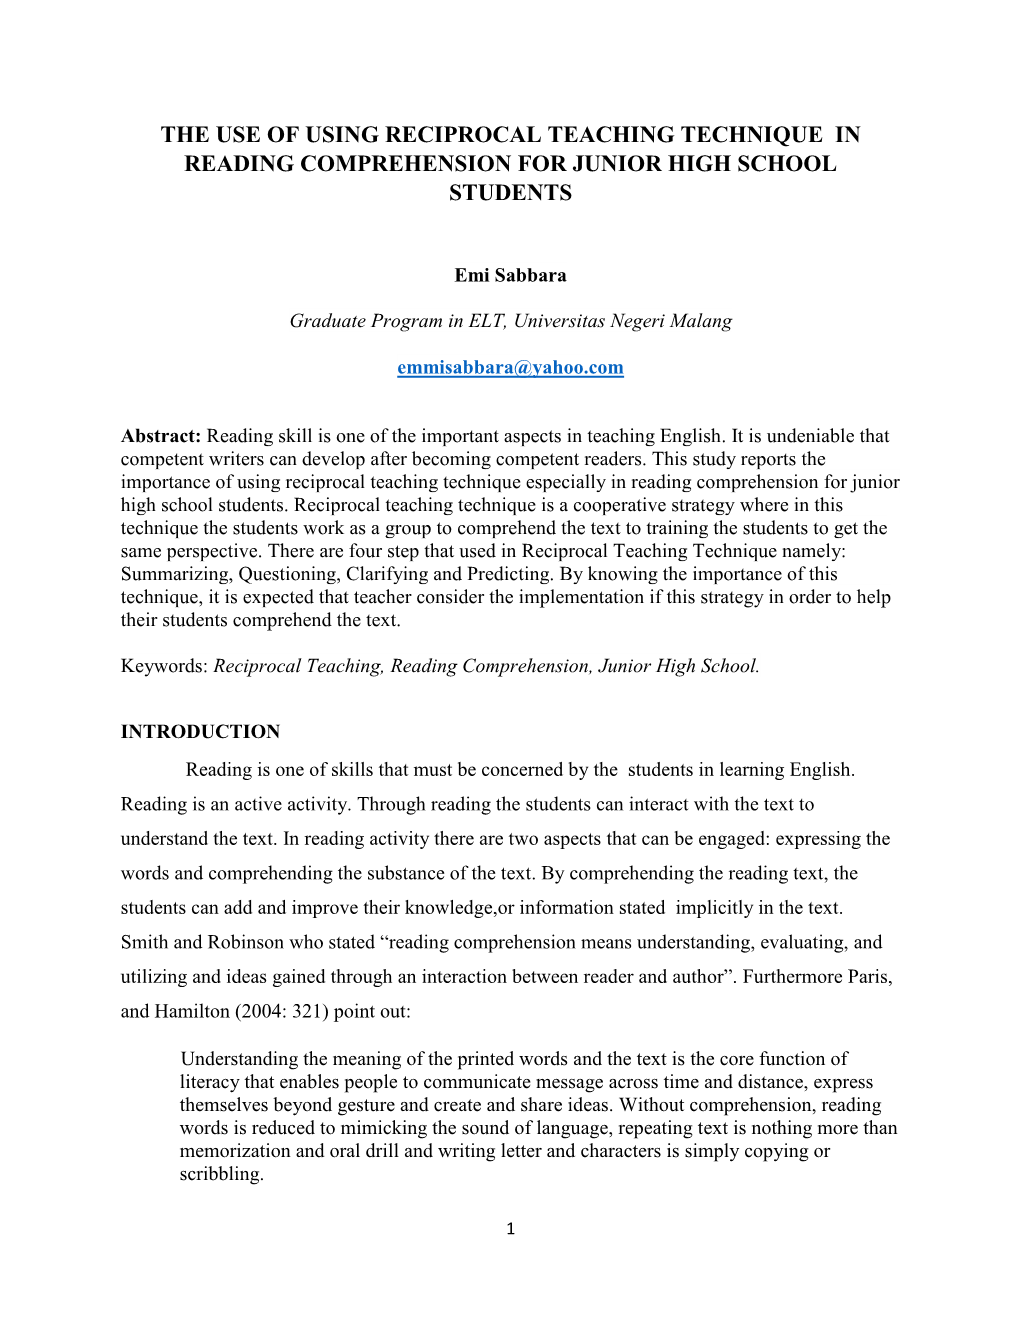 The Use of Using Reciprocal Teaching Technique in Reading Comprehension for Junior High School Students